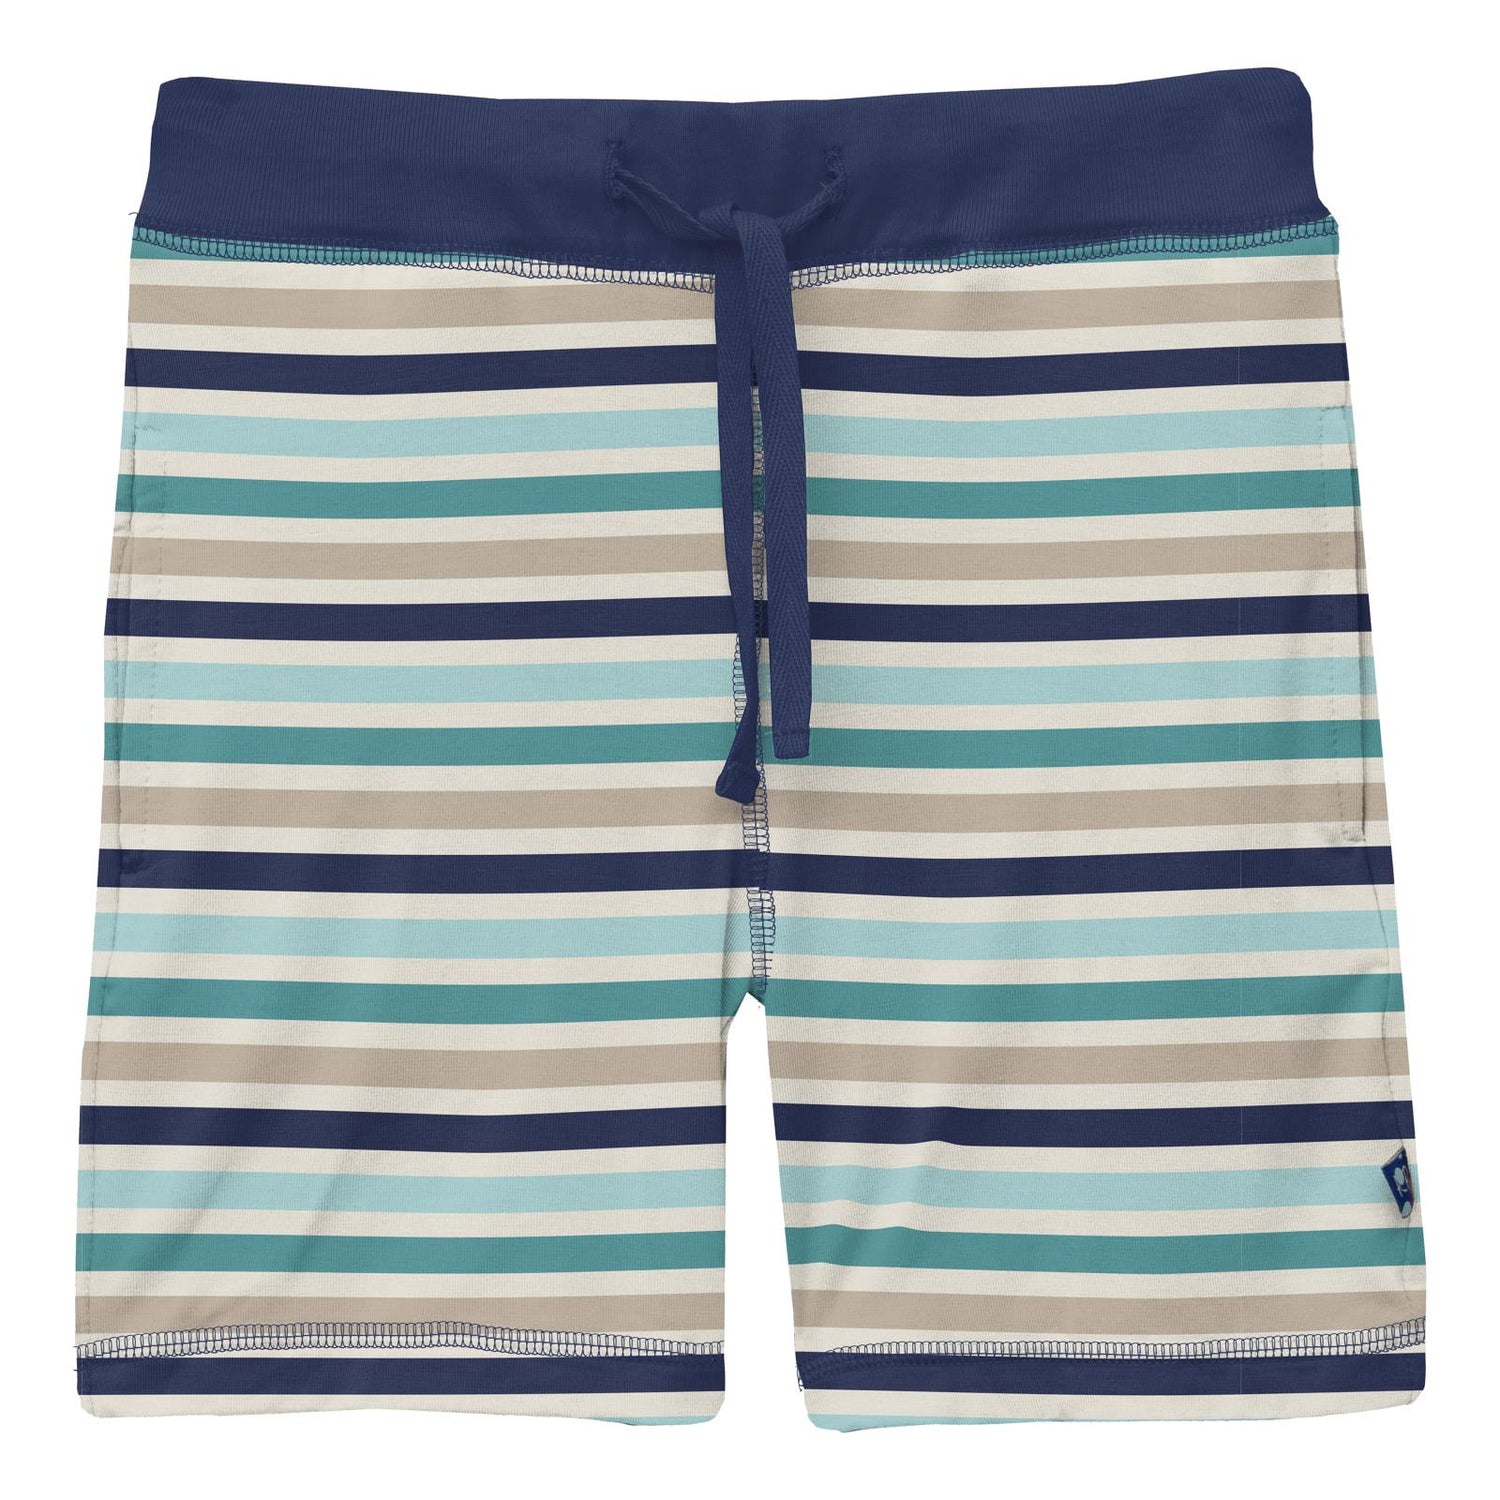 Print Lightweight Drawstring Shorts in Sand and Sea Stripe